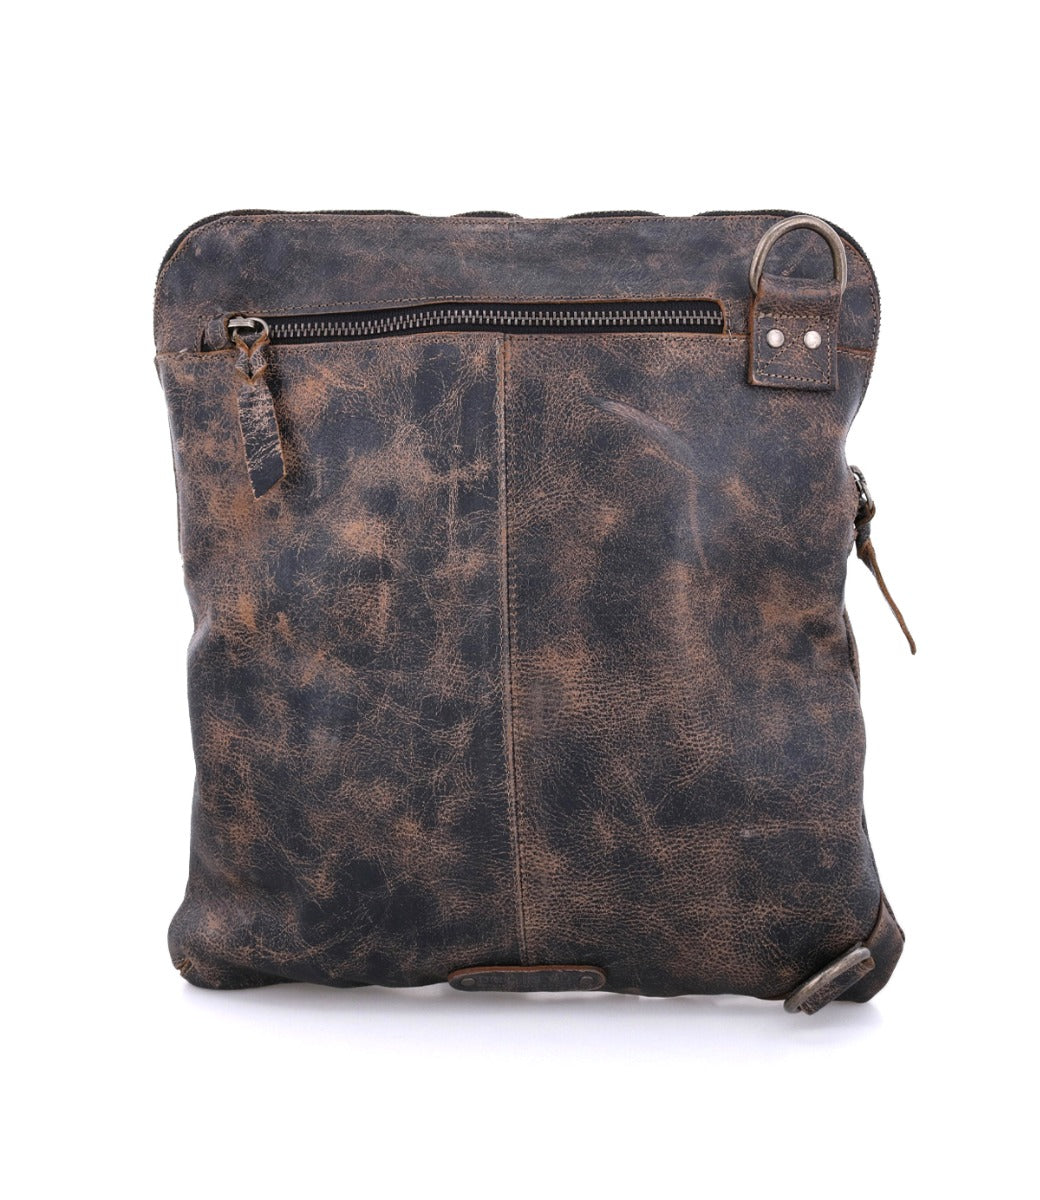 A Bed Stu Aiken distressed black leather crossbody bag with a zippered compartment.